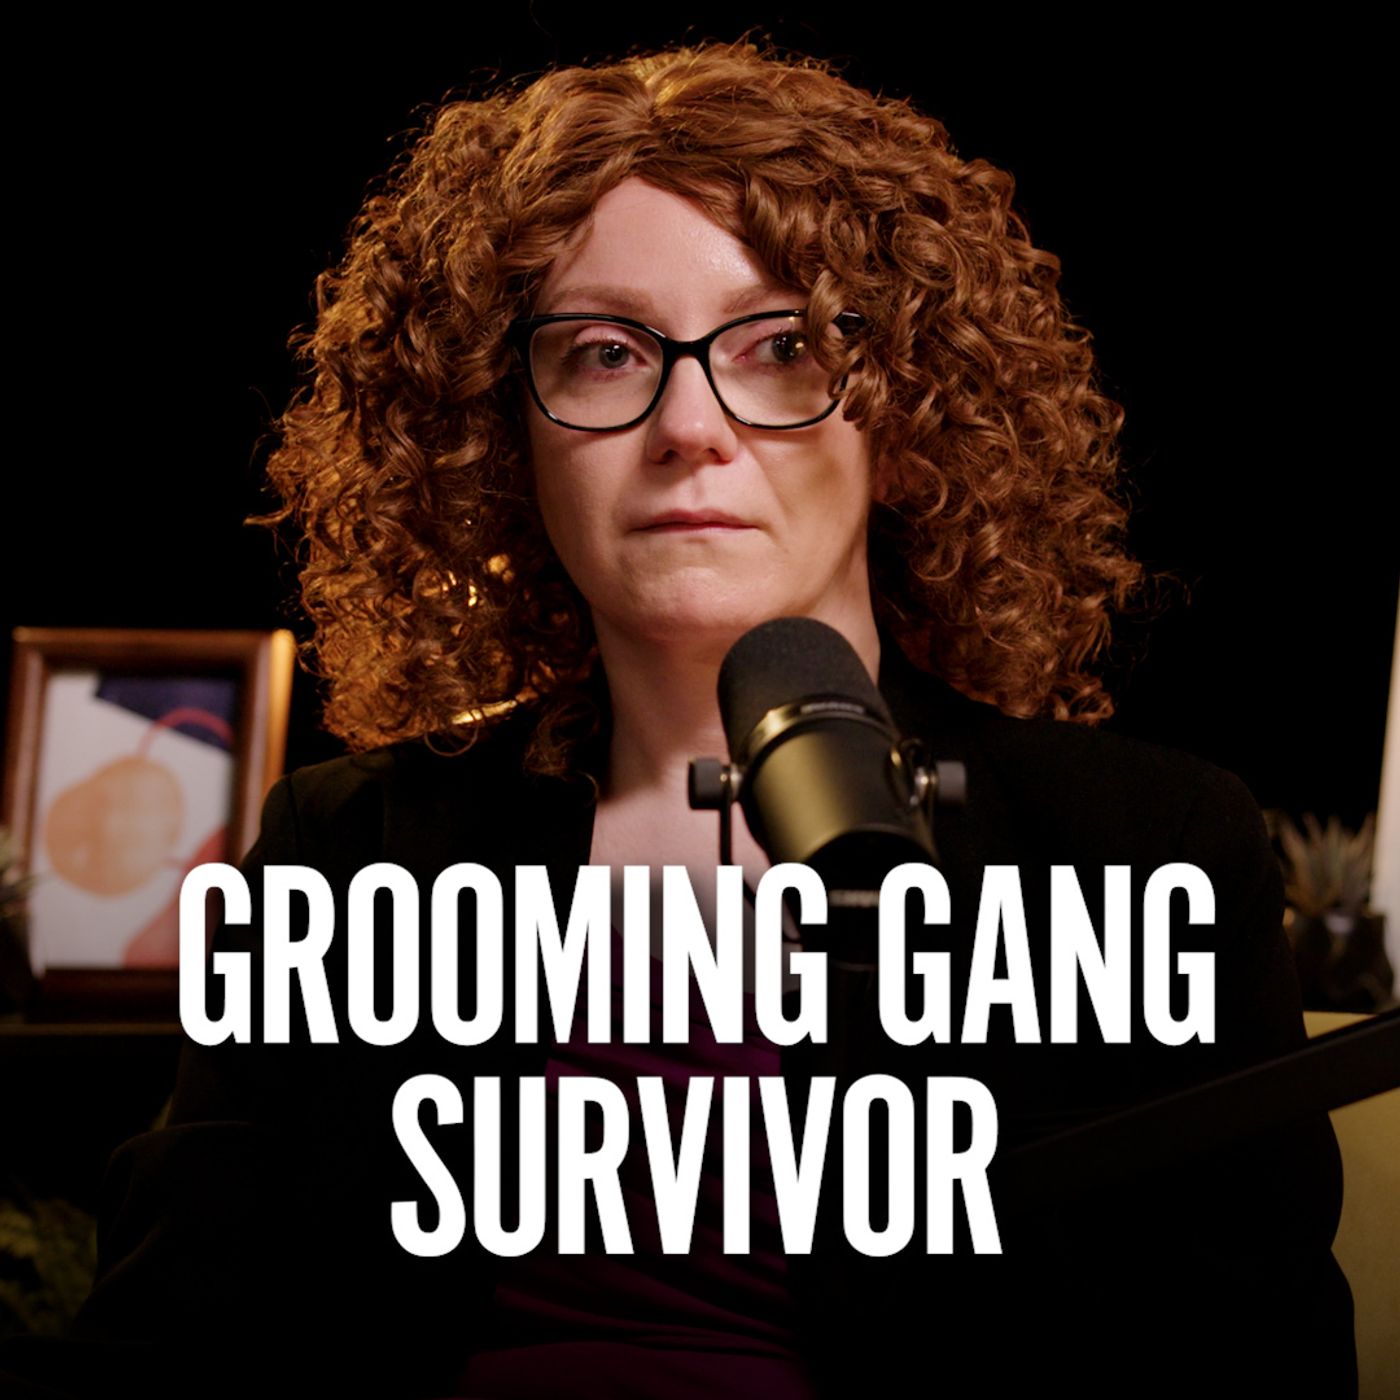 S2 Ep8: Grooming Gang Survivor: I Was Sexually Assaulted By 70 Men